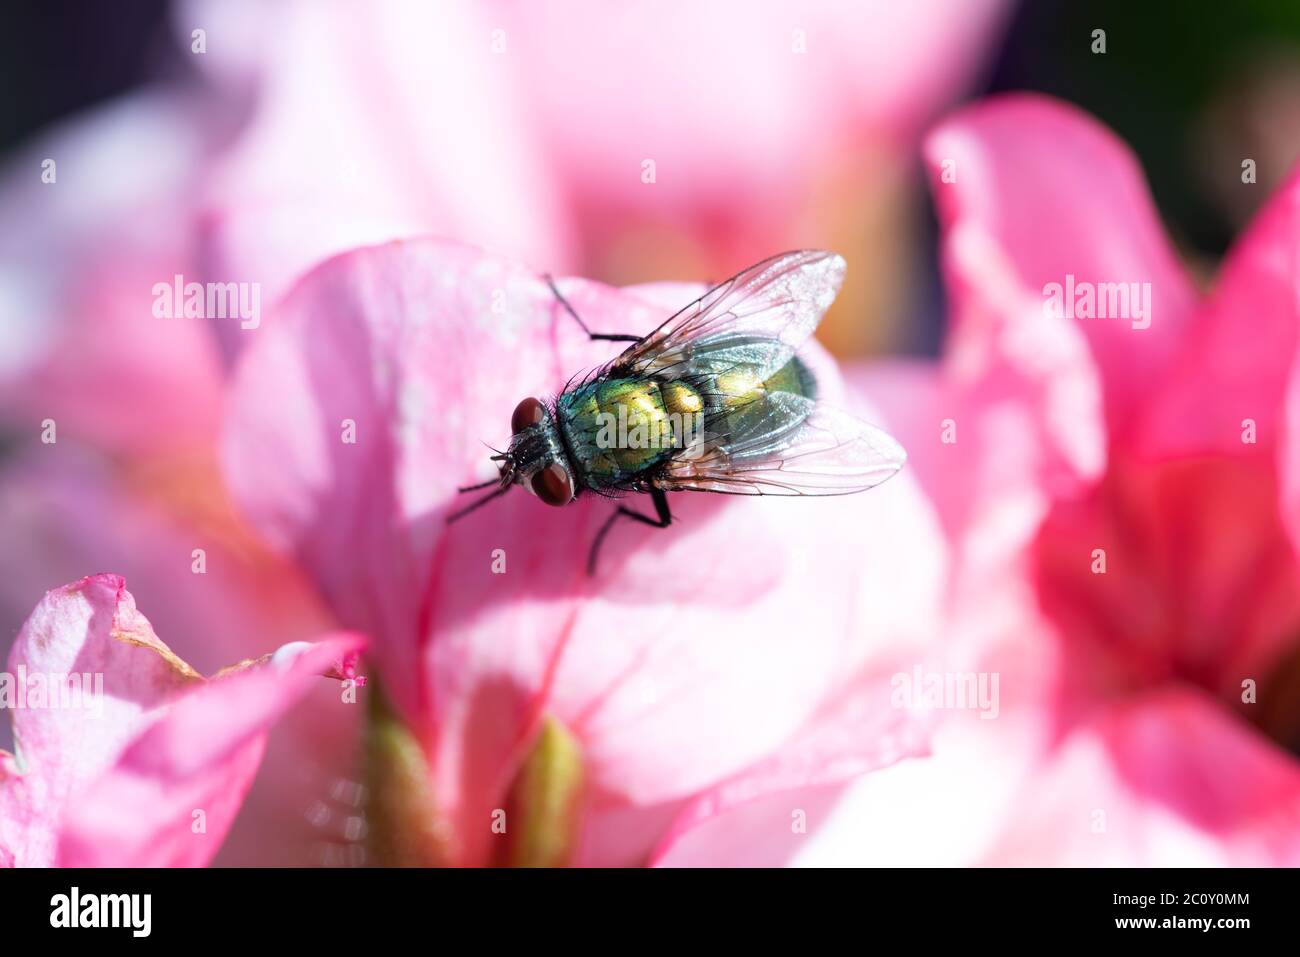 A House Fly is Sitting on a Flower Outside Stock Photo